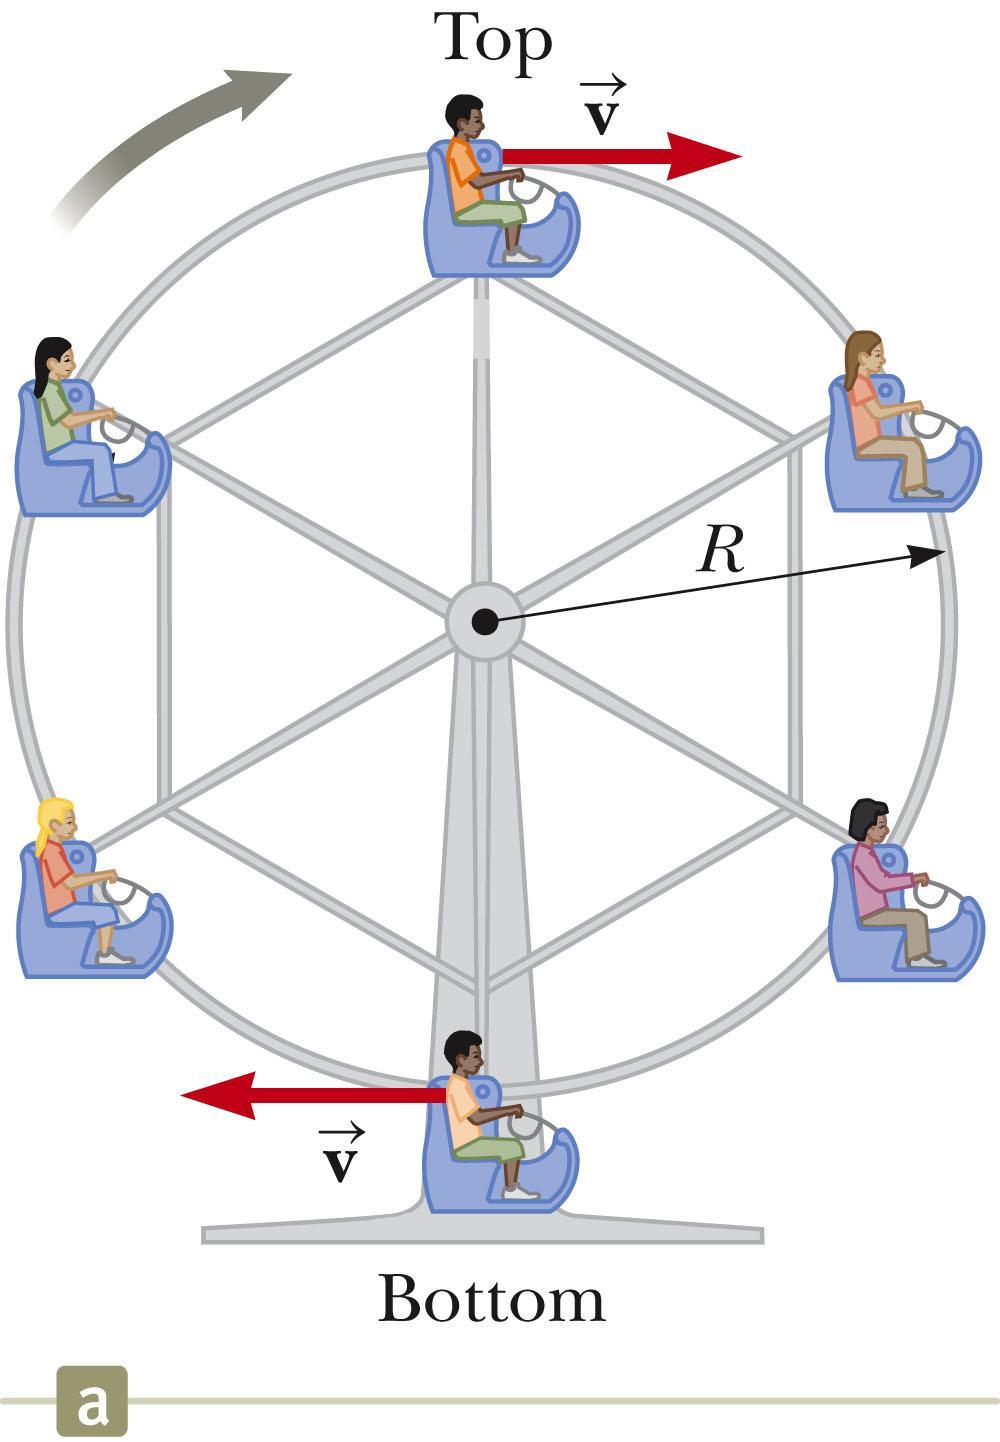 Ferris Wheel A child of mass m rides on a Ferris wheel as shown. The child moves in a vertical circle of radius 10.0 m at a constant speed of 3.00 m/s.